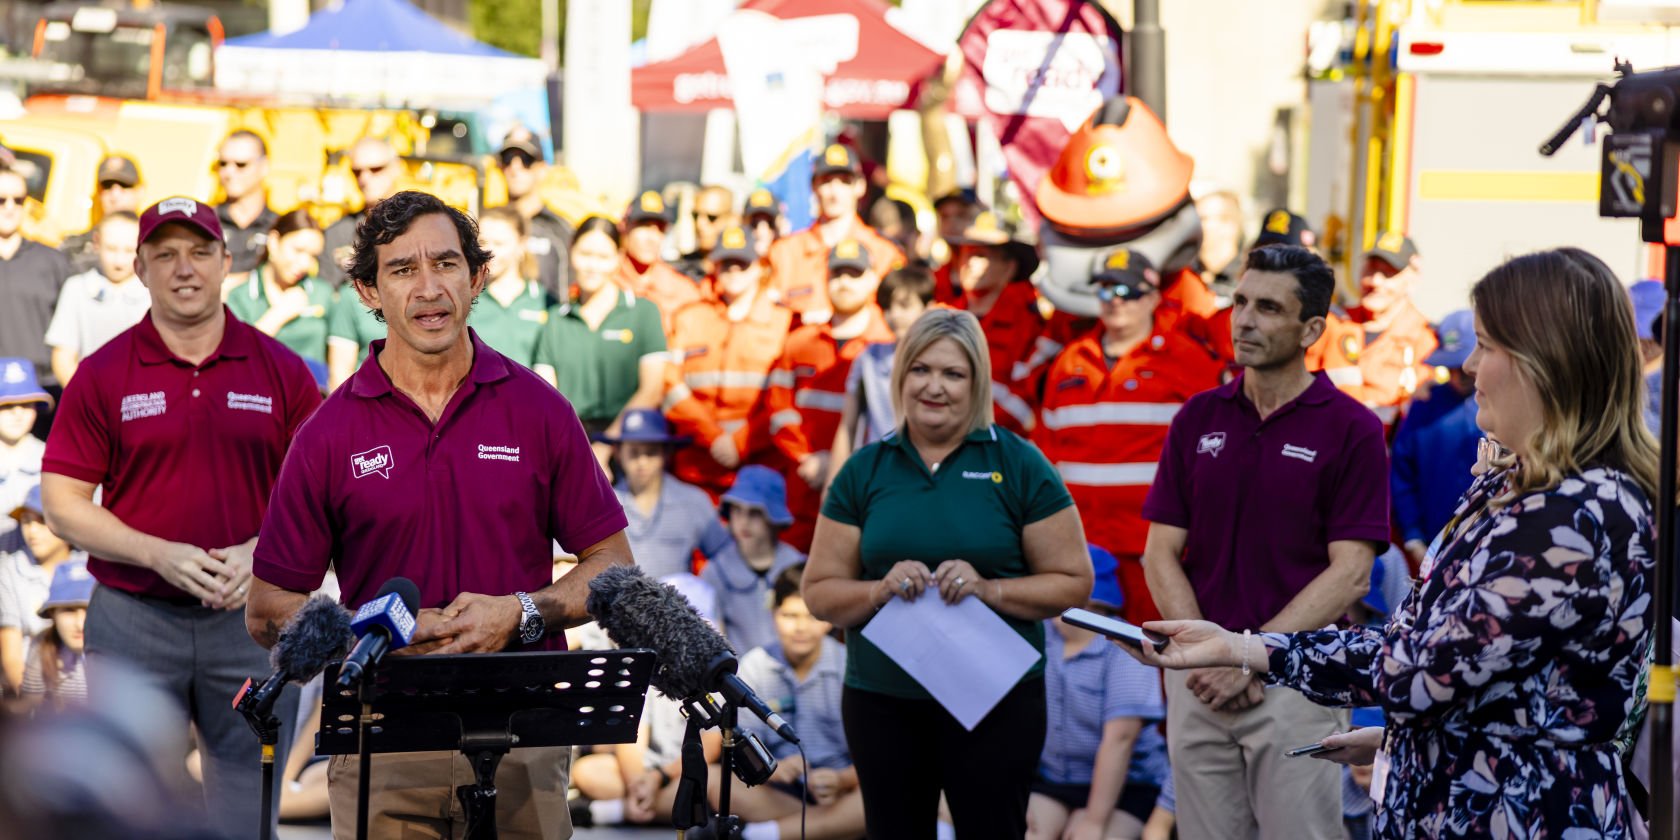 Suncorp Group encourages Queenslanders to prepare for severe weather season as Get Ready Queensland Week launches